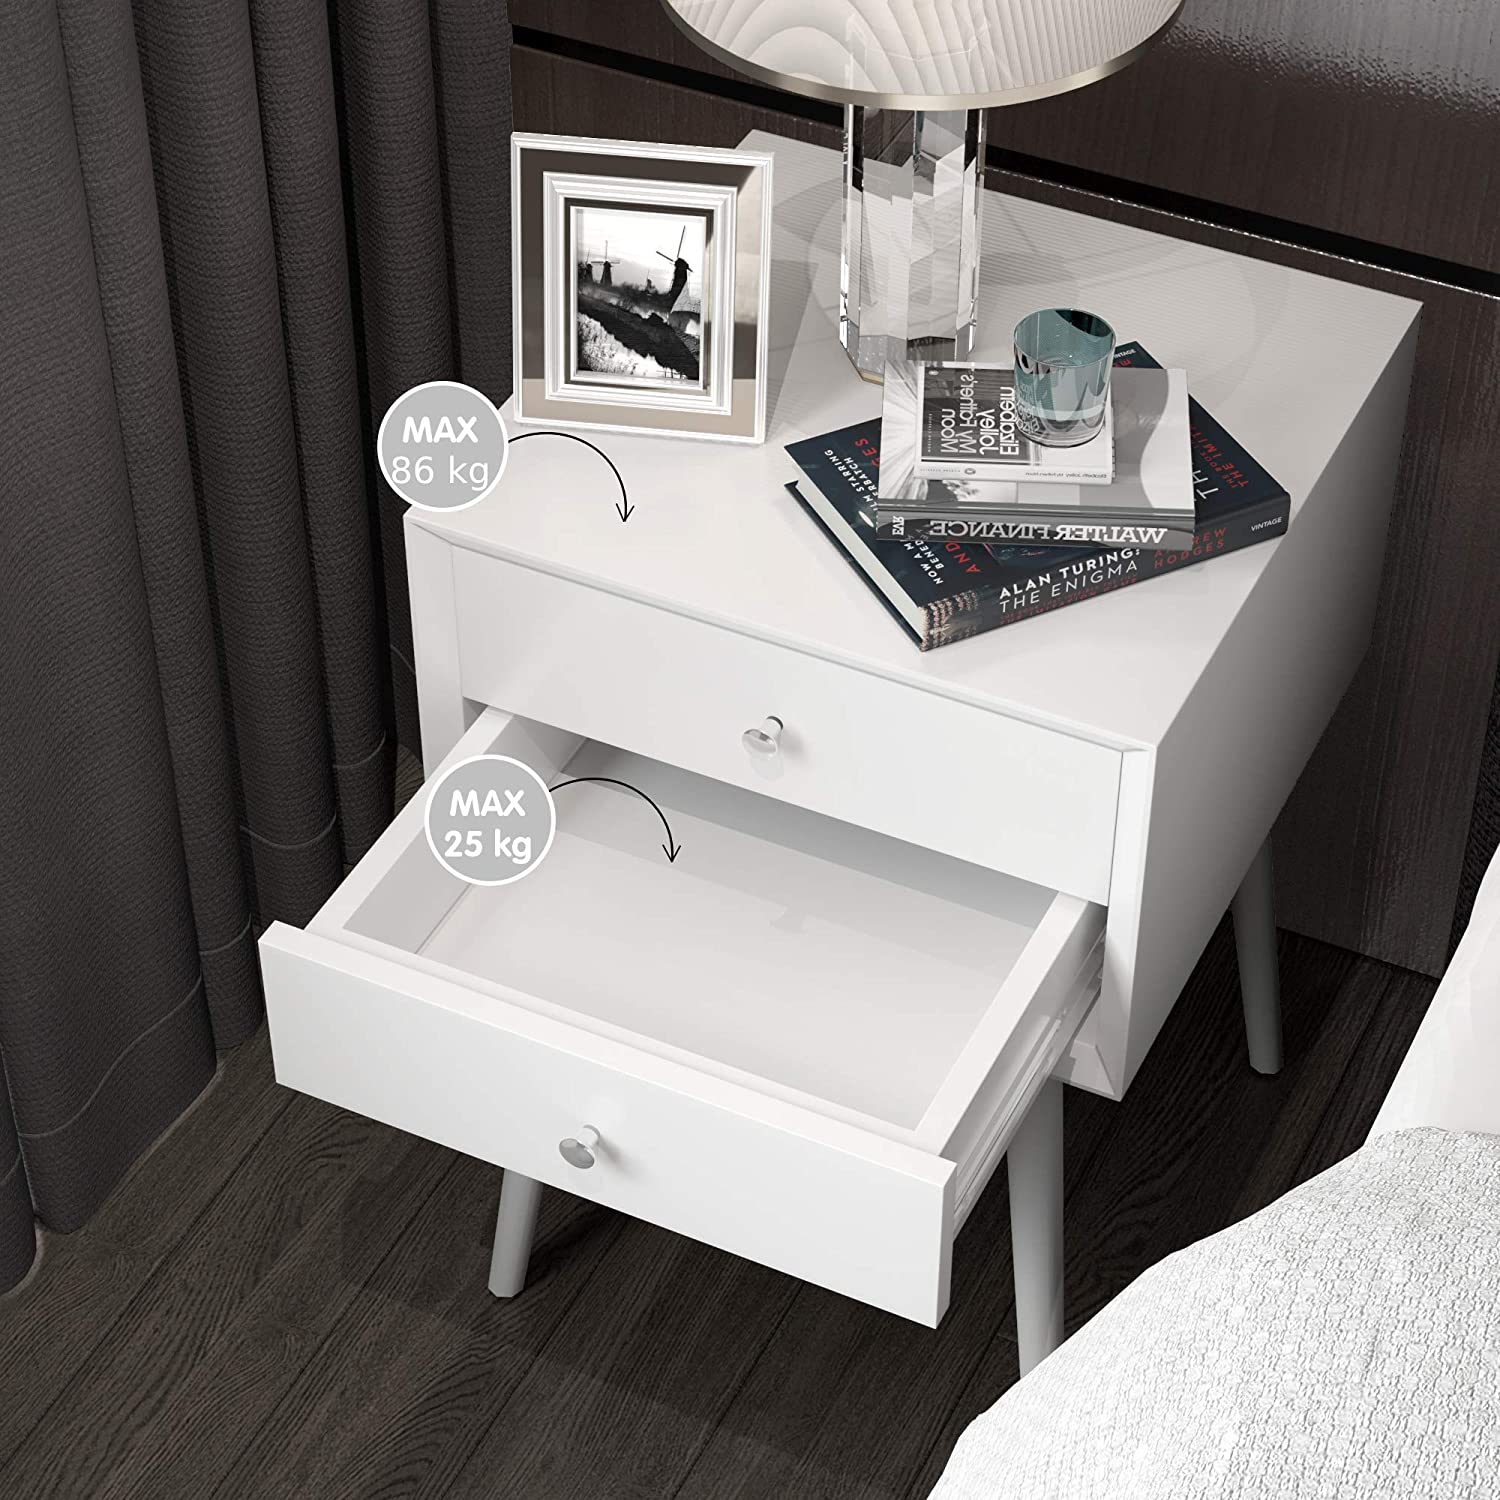 All White Bedside Table with 2 Drawers